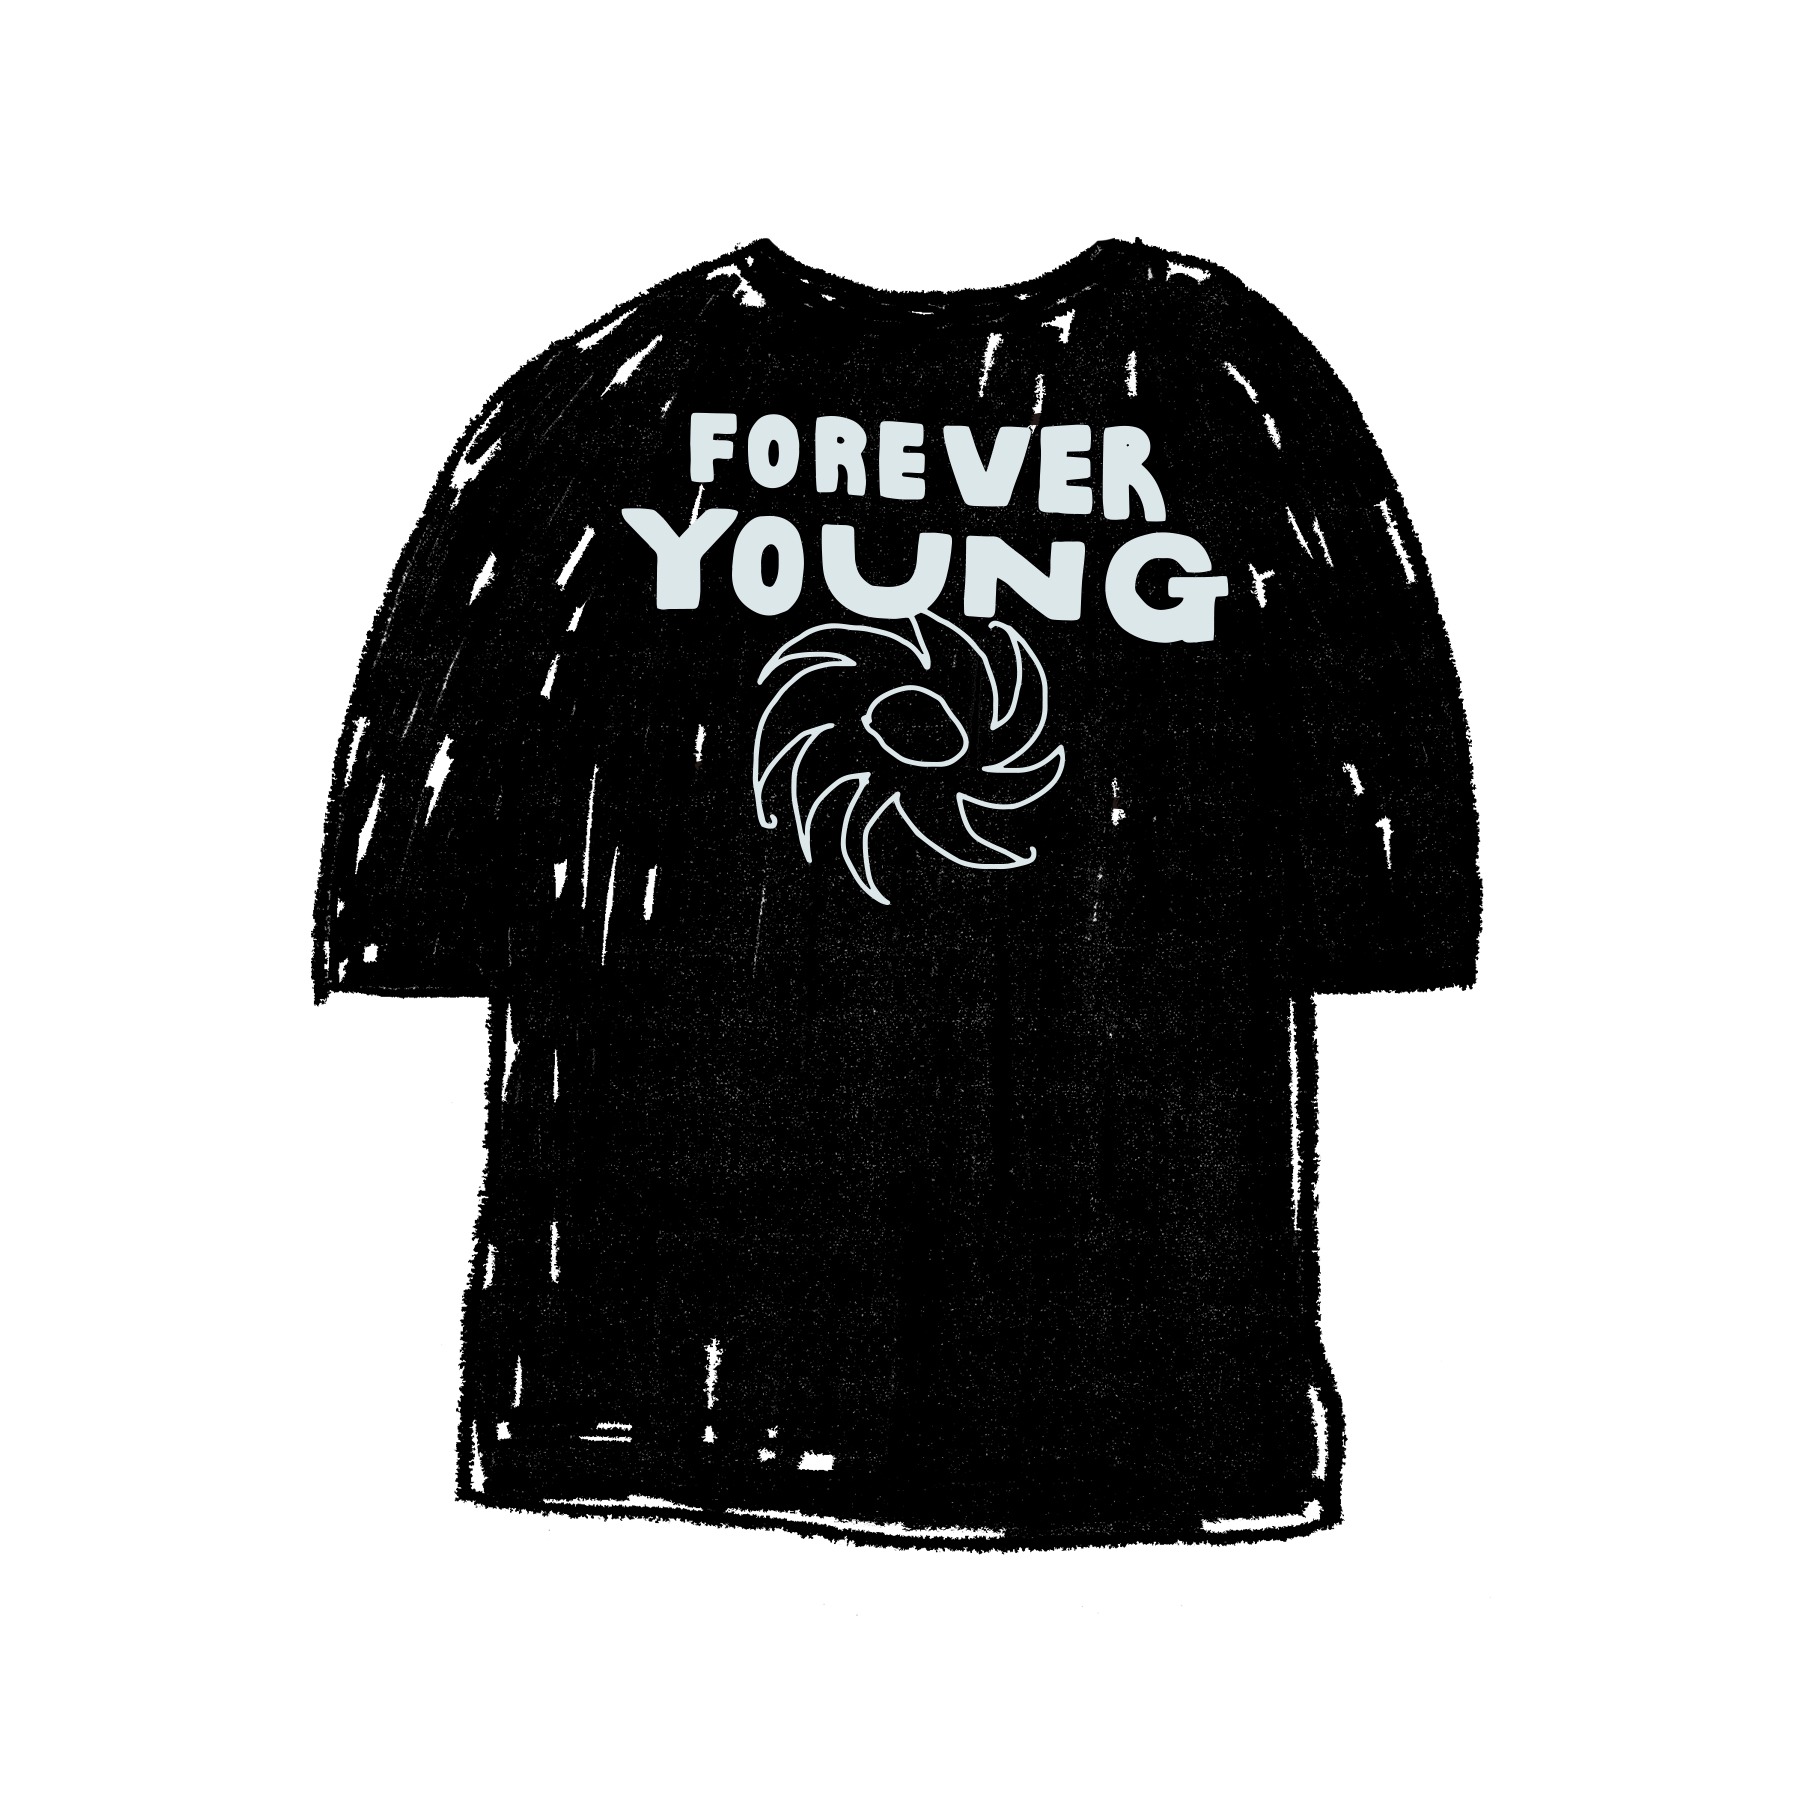 FOREVER YOUNG 1/2 T-SHIRT BLACK